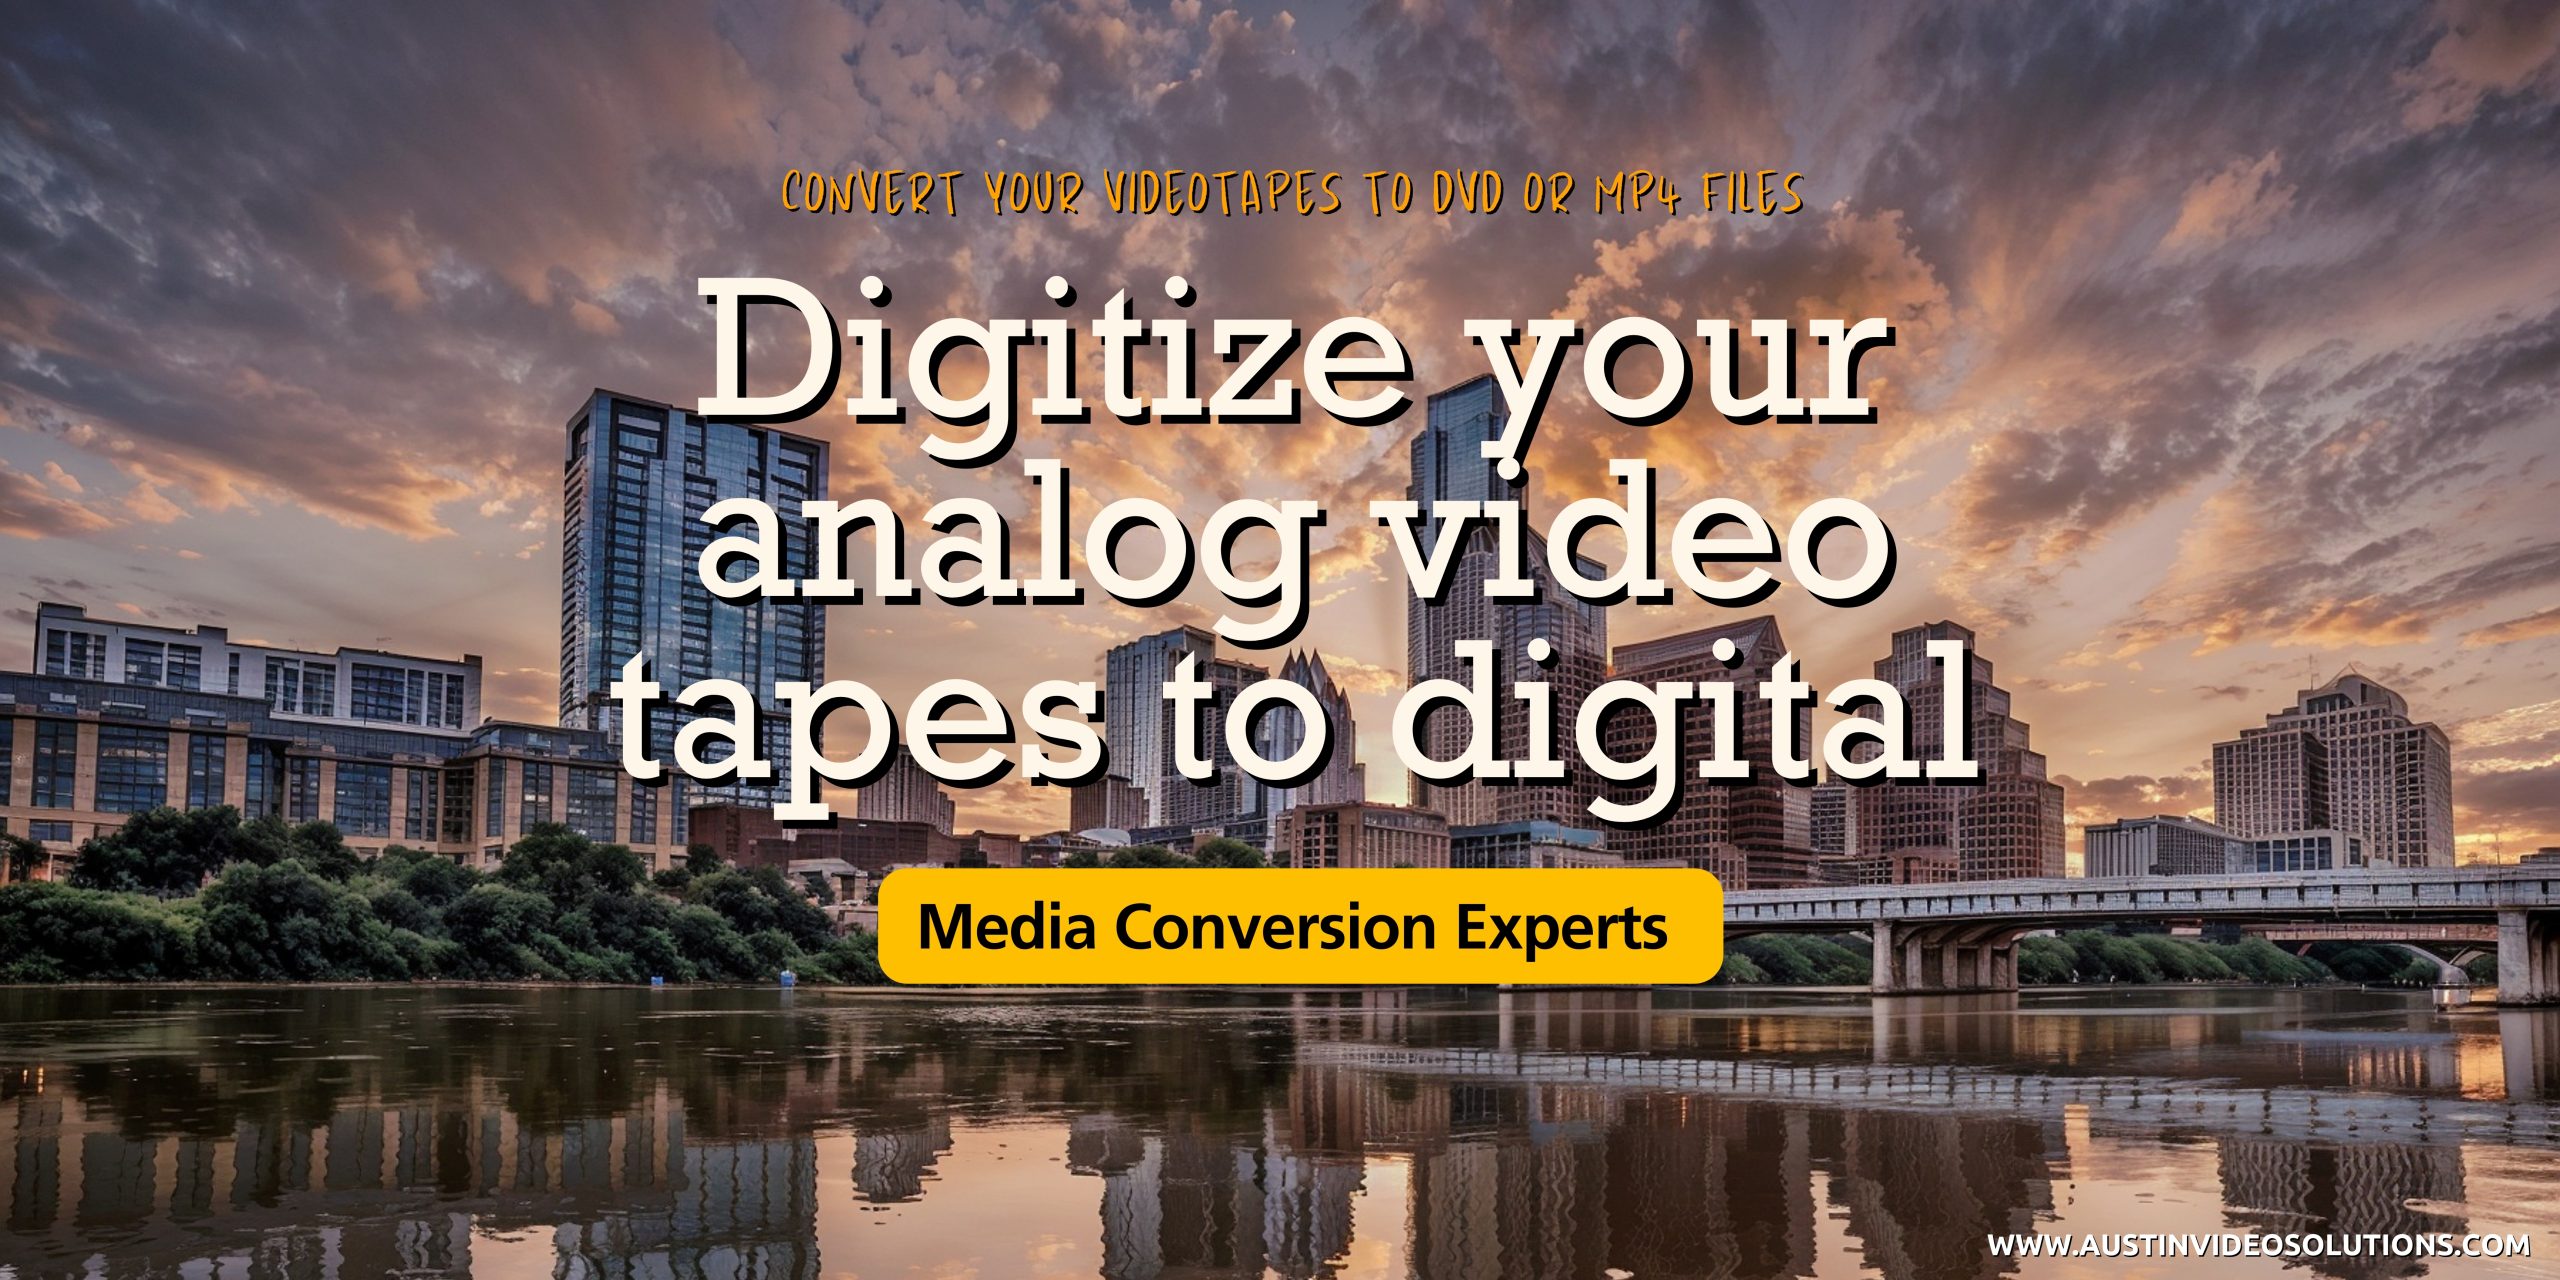 Professional VHS to digital conversion process, transforming old videotapes into high-quality MP4 files